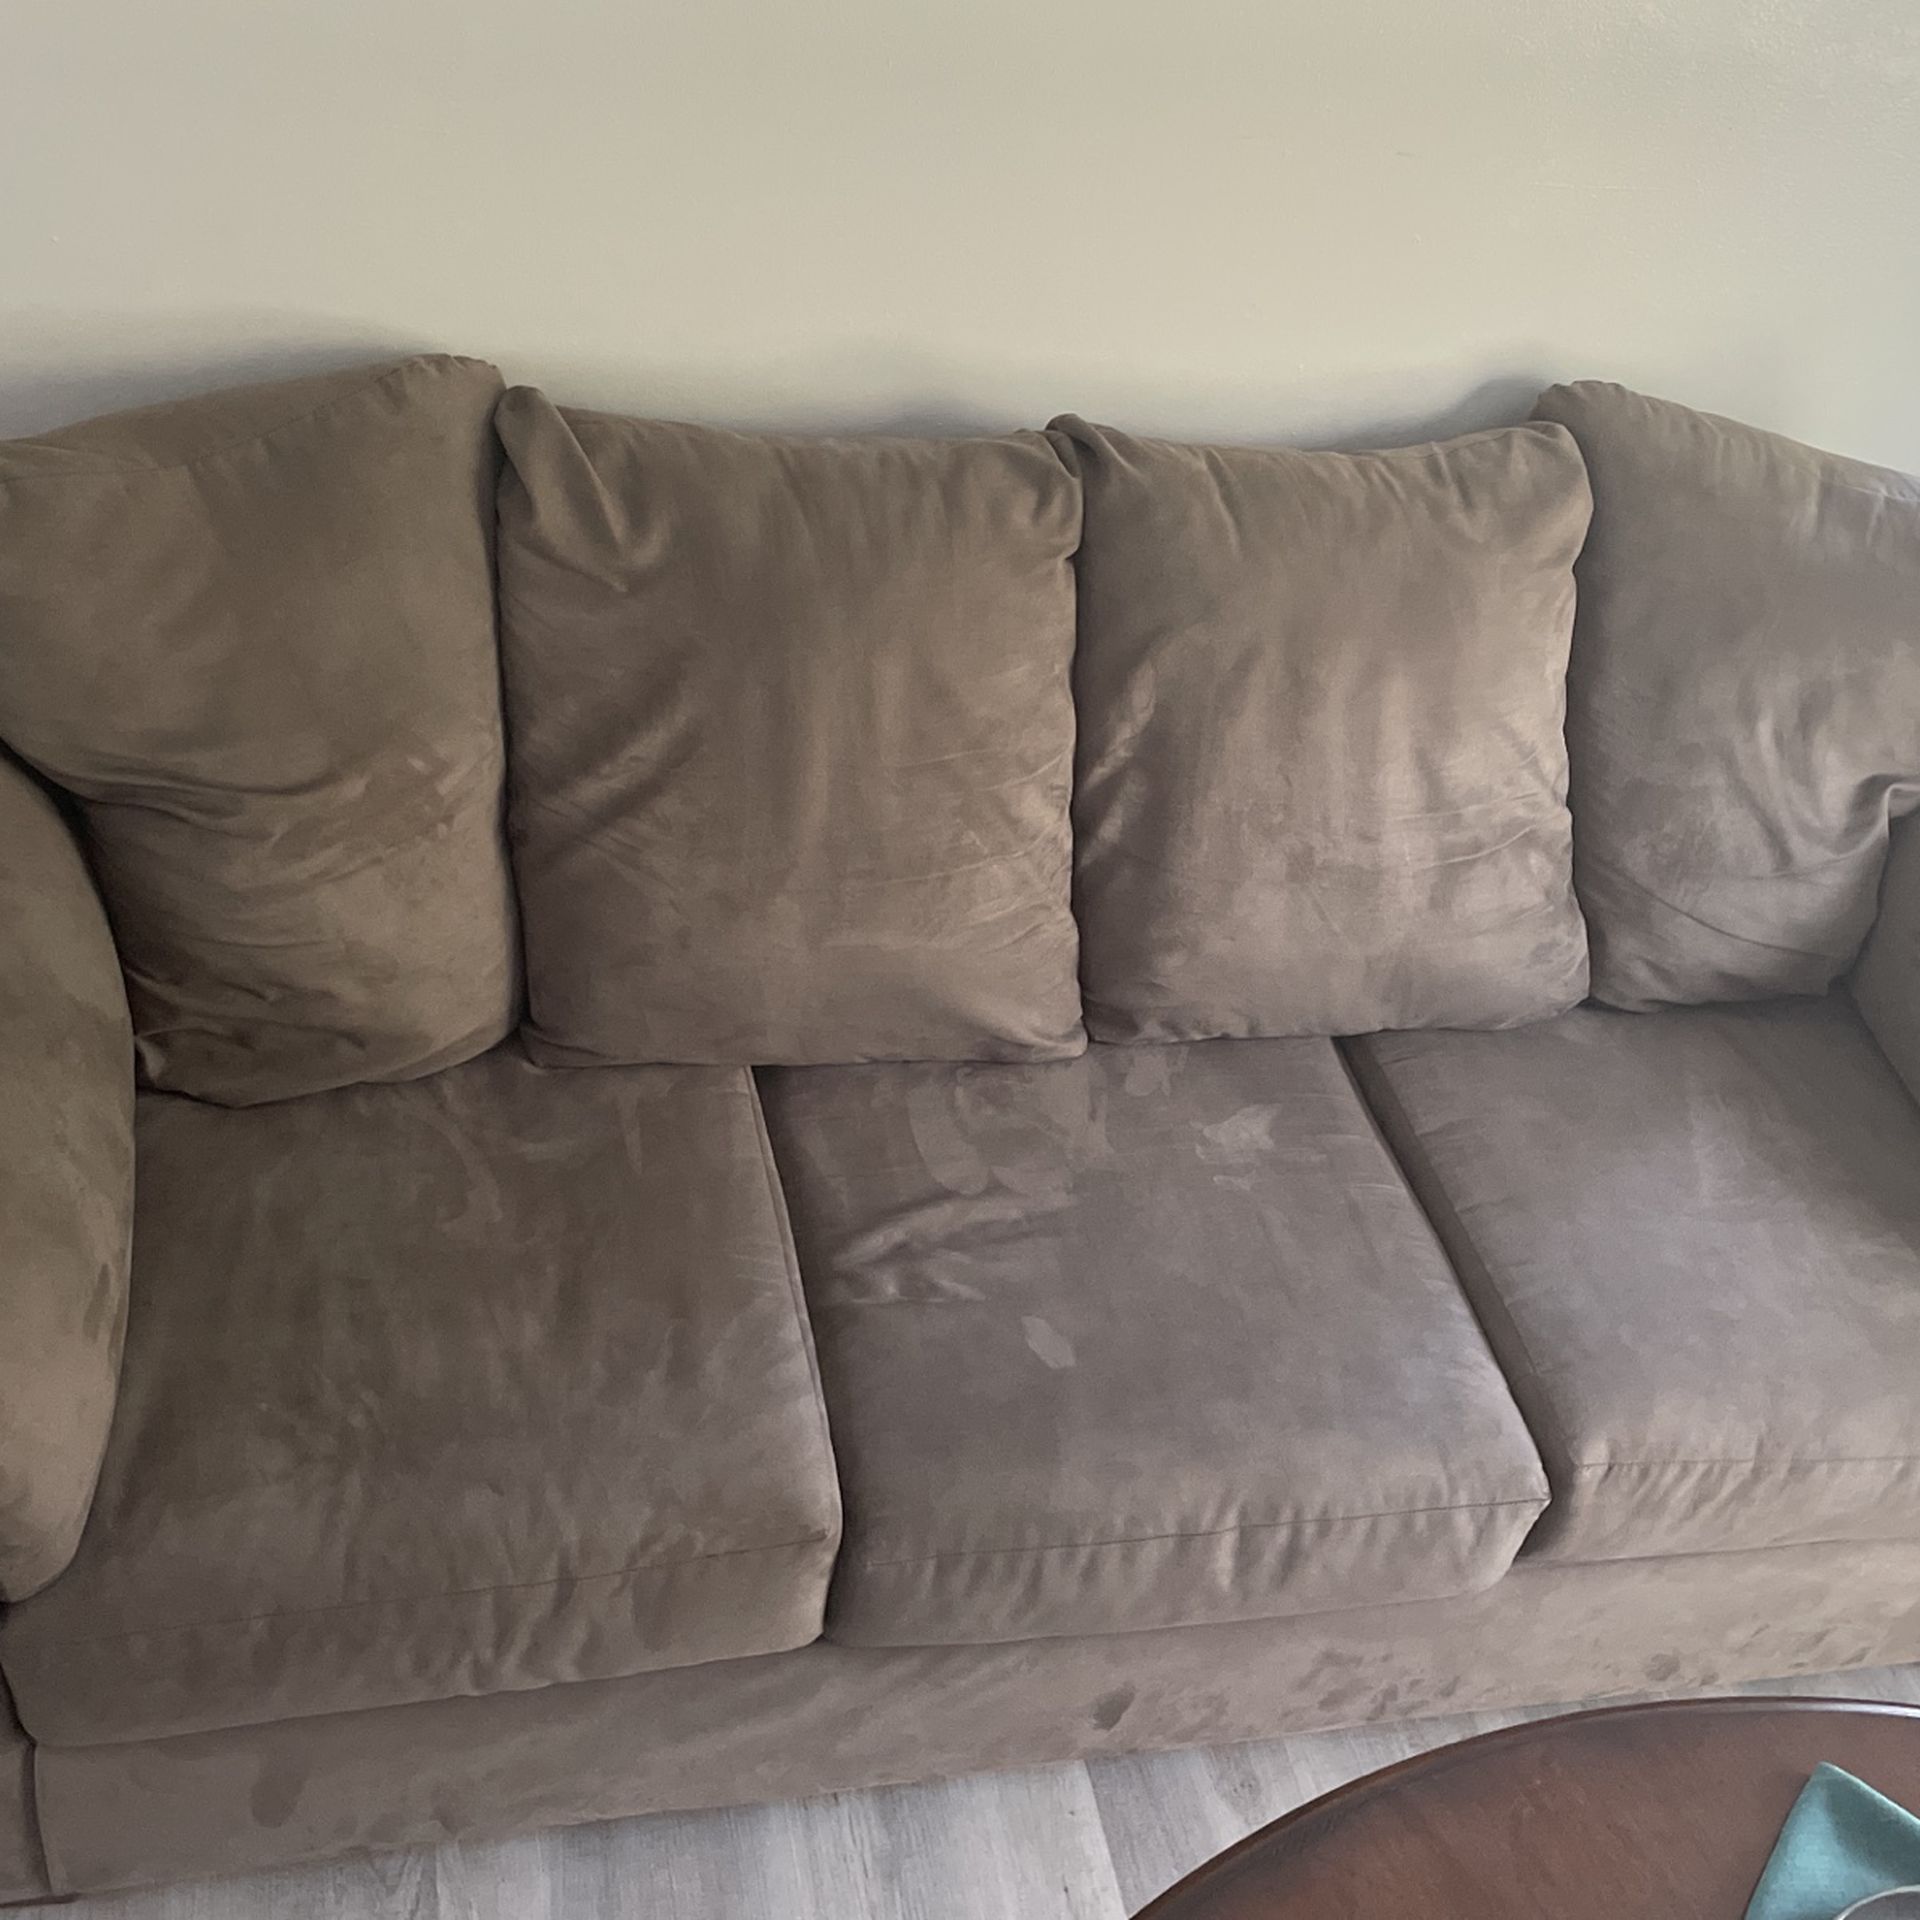 Ashley Furniture Cobblestone Darcy couch Smoke and pet free home Like new! 